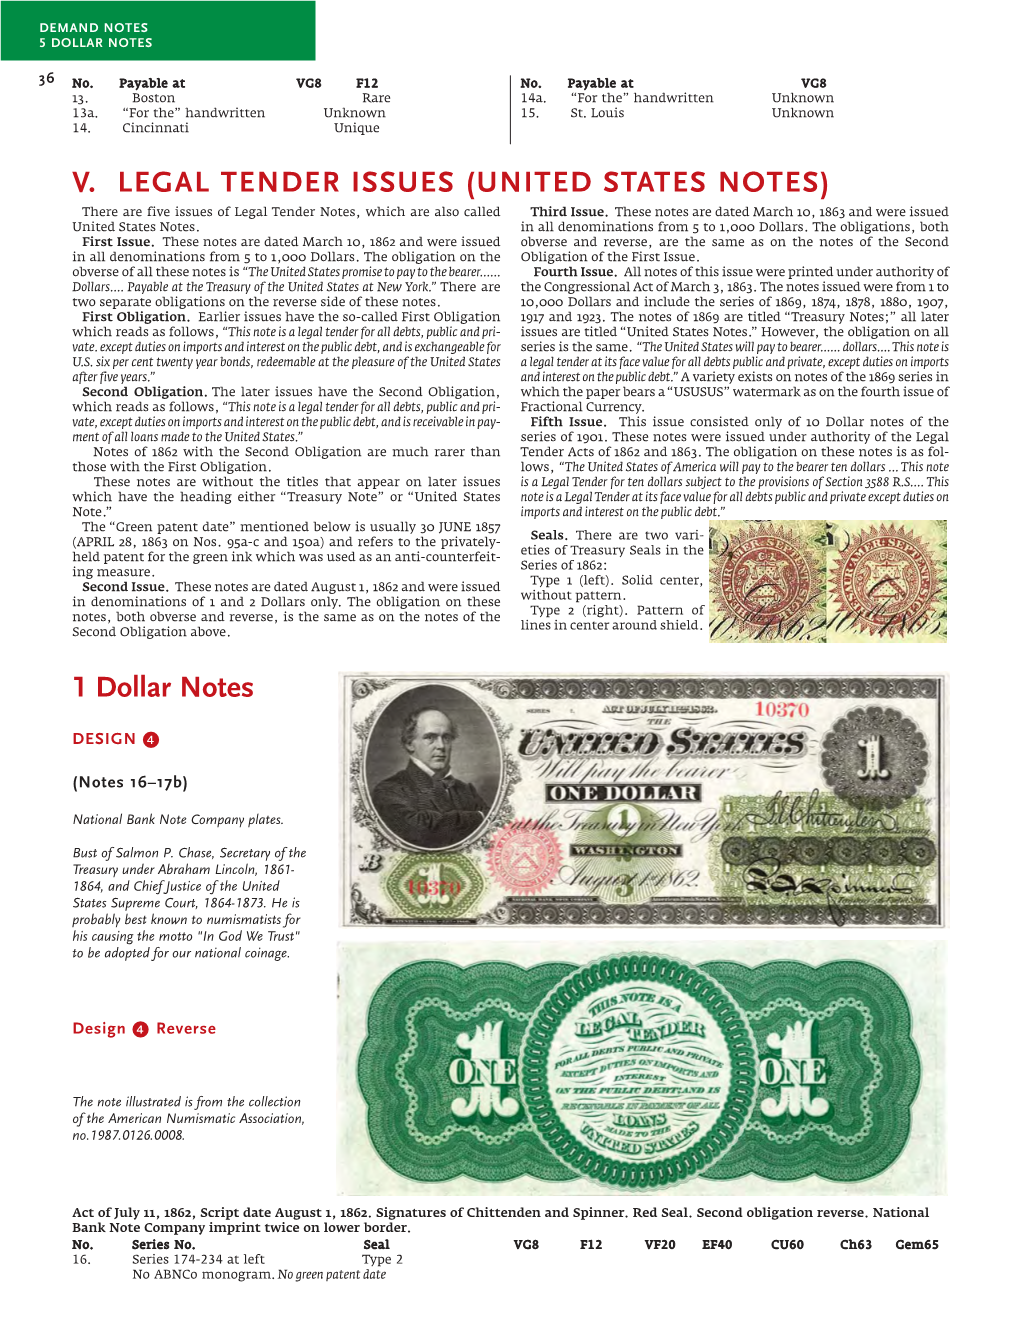 V. LEGAL TENDER ISSUES (UNITED STATES NOTES) 1 Dollar Notes